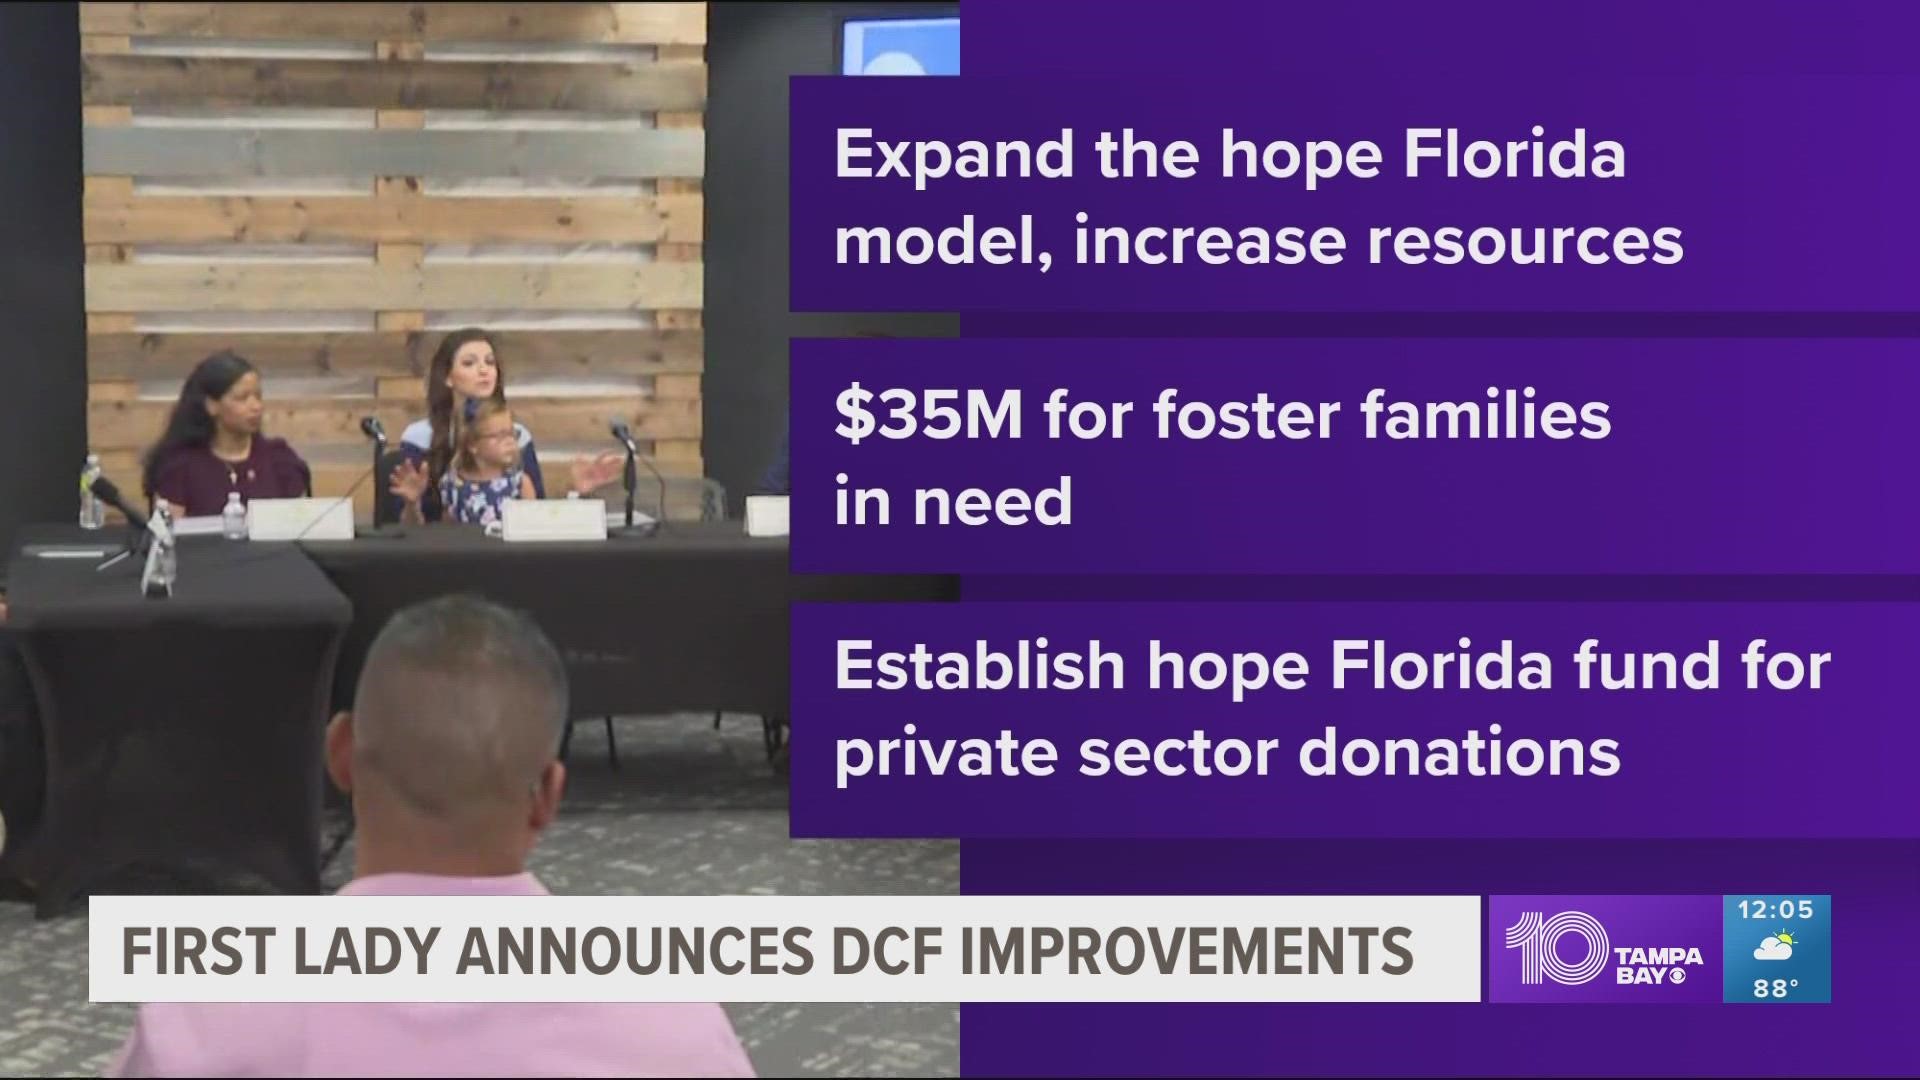 Foster and adoptive families can now receive the resources offered by Hope Florida.